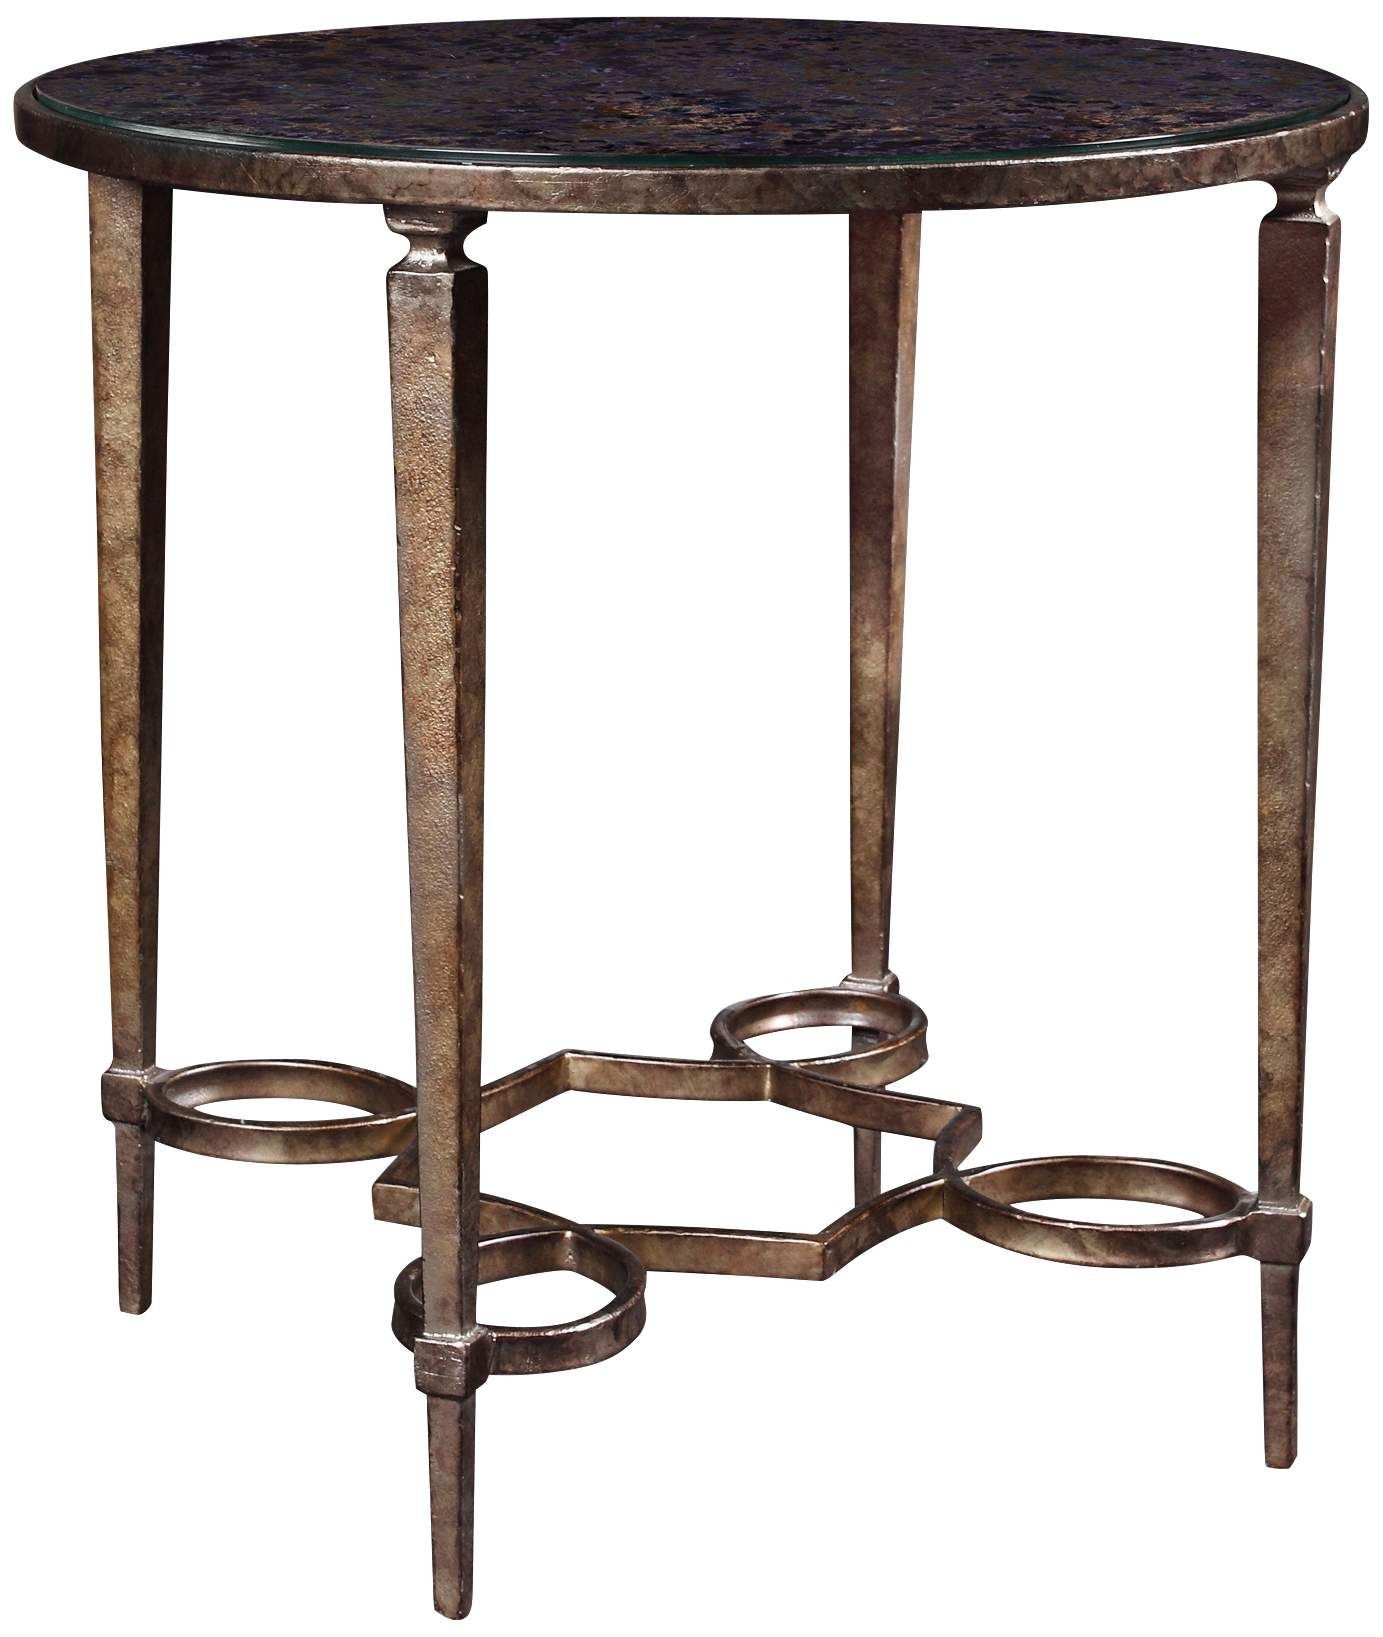 Carrie antiqued mirror round metal end table di 2020 ide